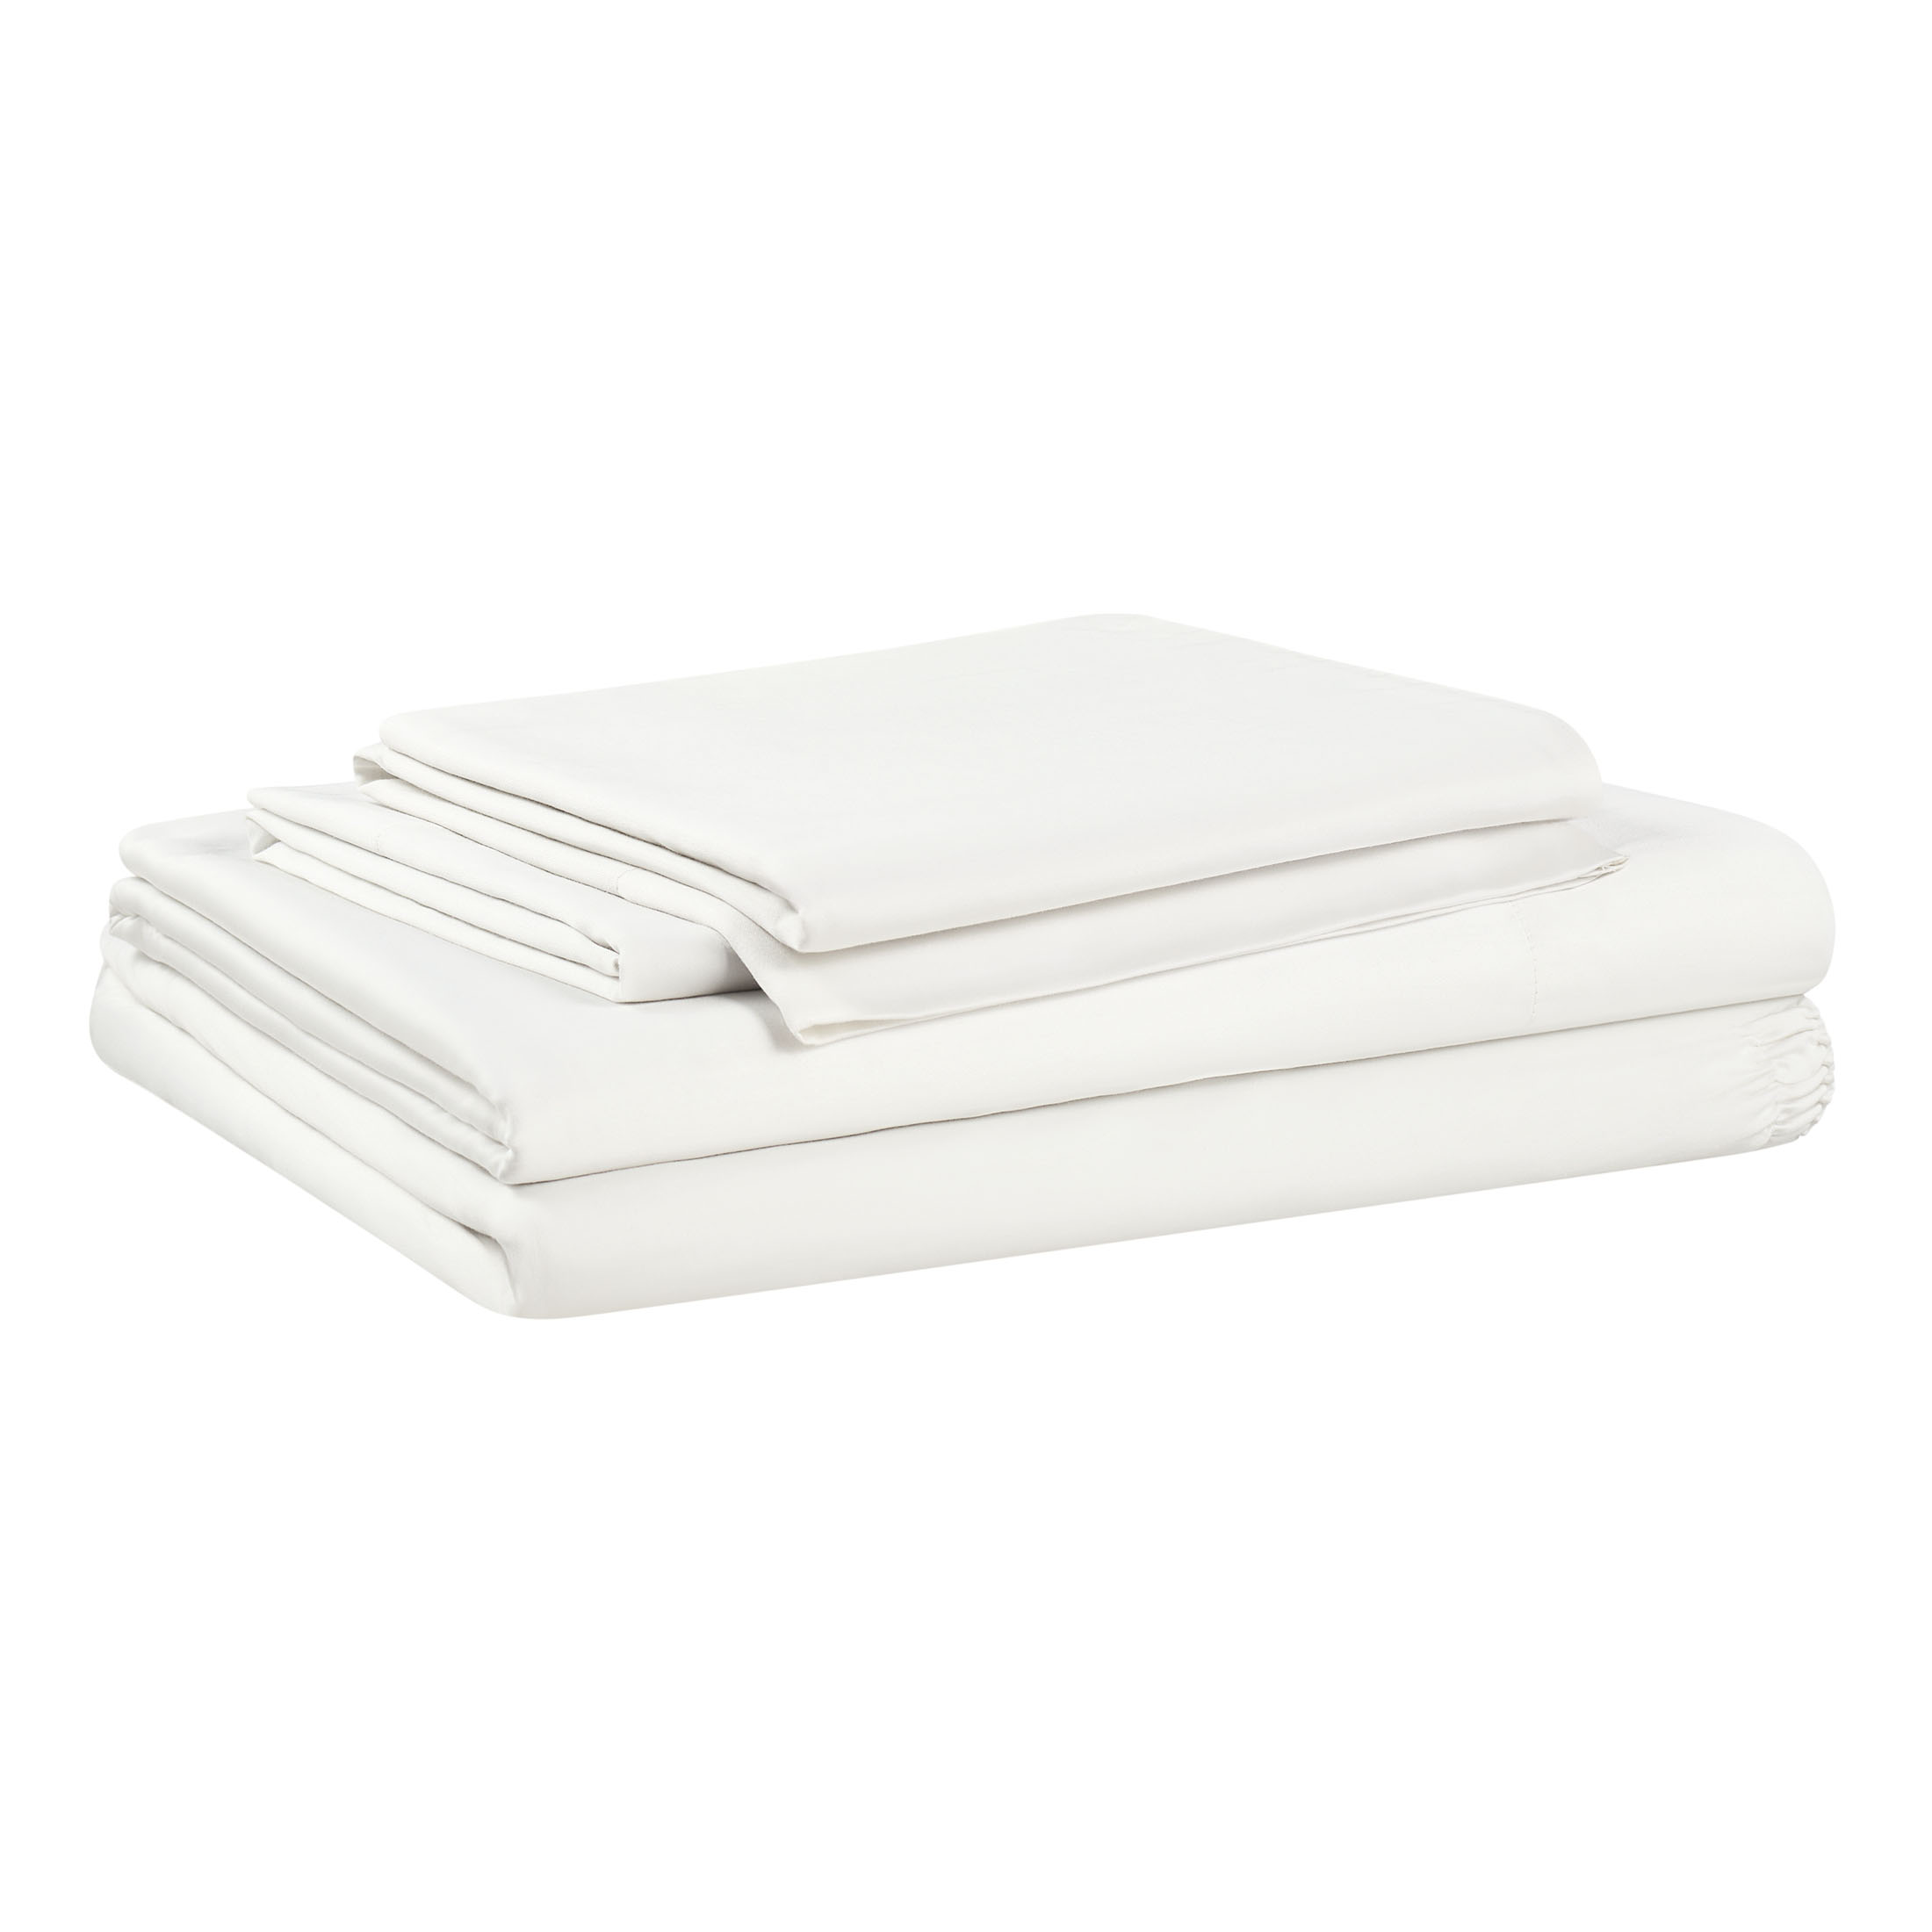 Allswell Soft & Silky 4-Piece Bleached Linen Viscose from Bamboo Sateen Bed Sheet Set, Queen - image 1 of 12